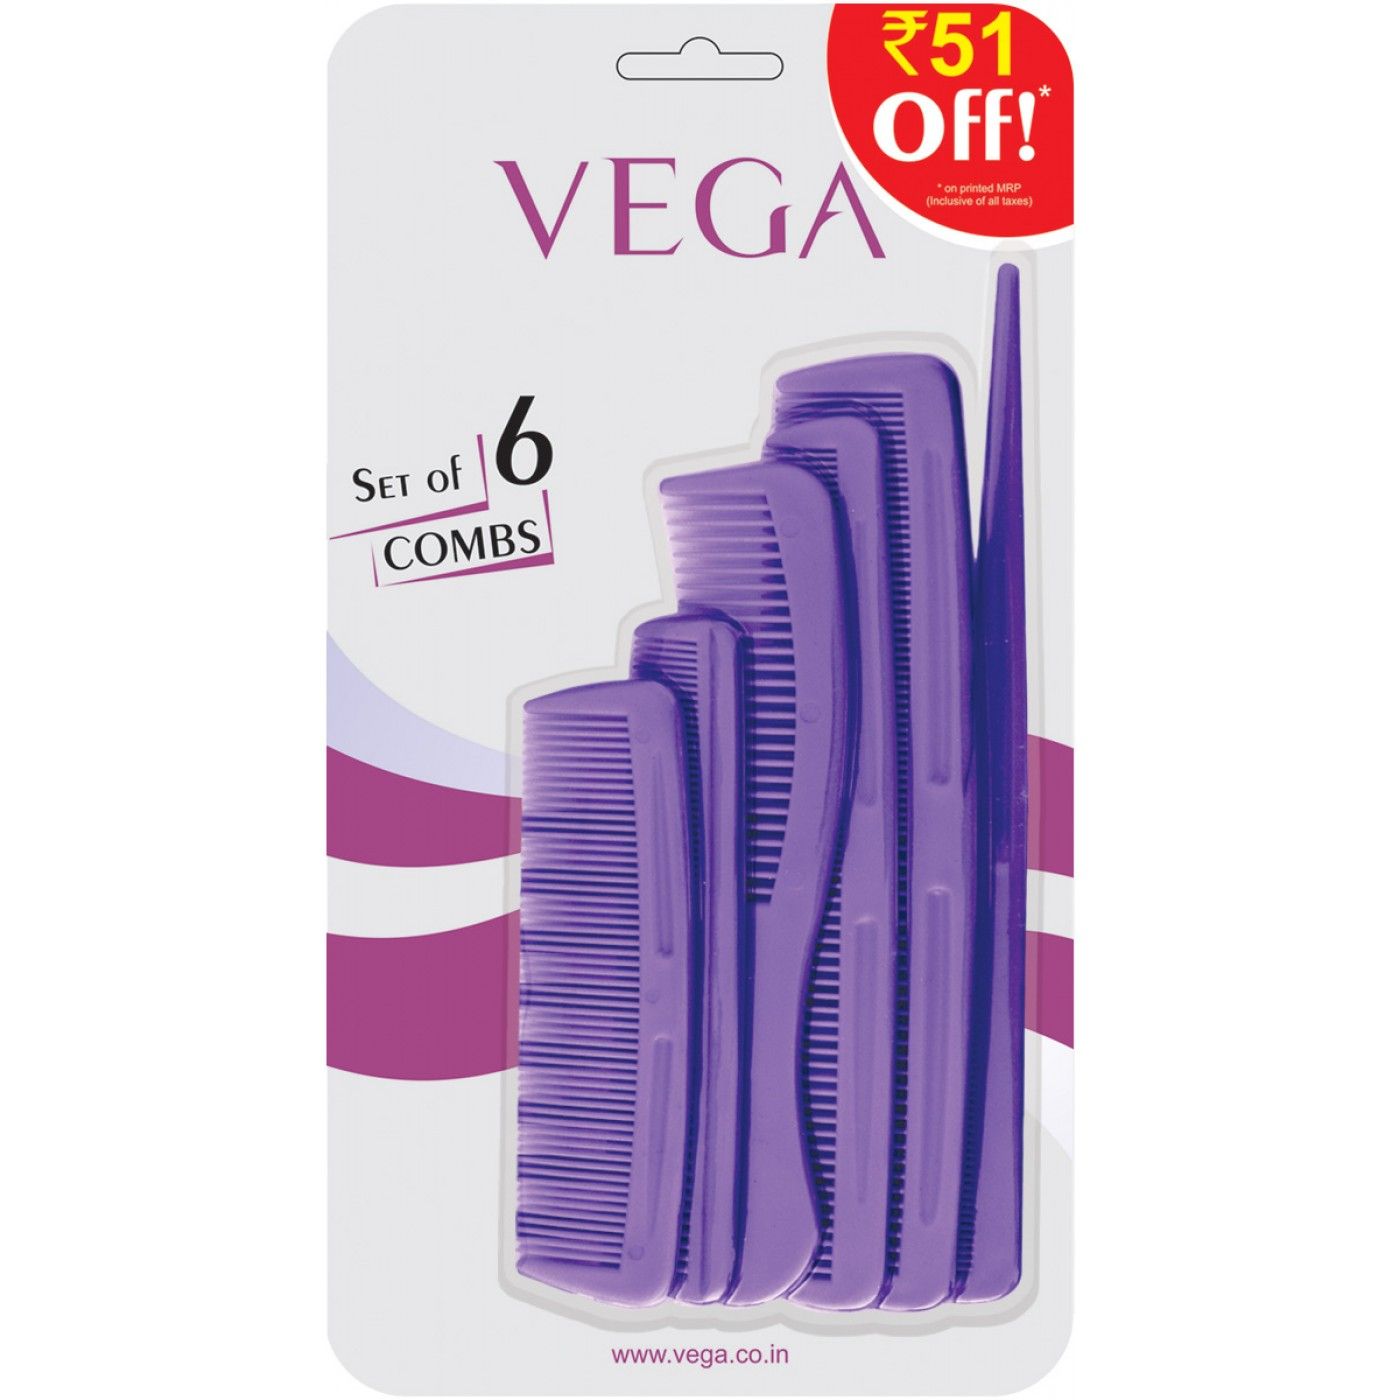 VEGA Combs - Set Of 6 (Off Rs.51/-) (HCS-02) (Color May Vary)